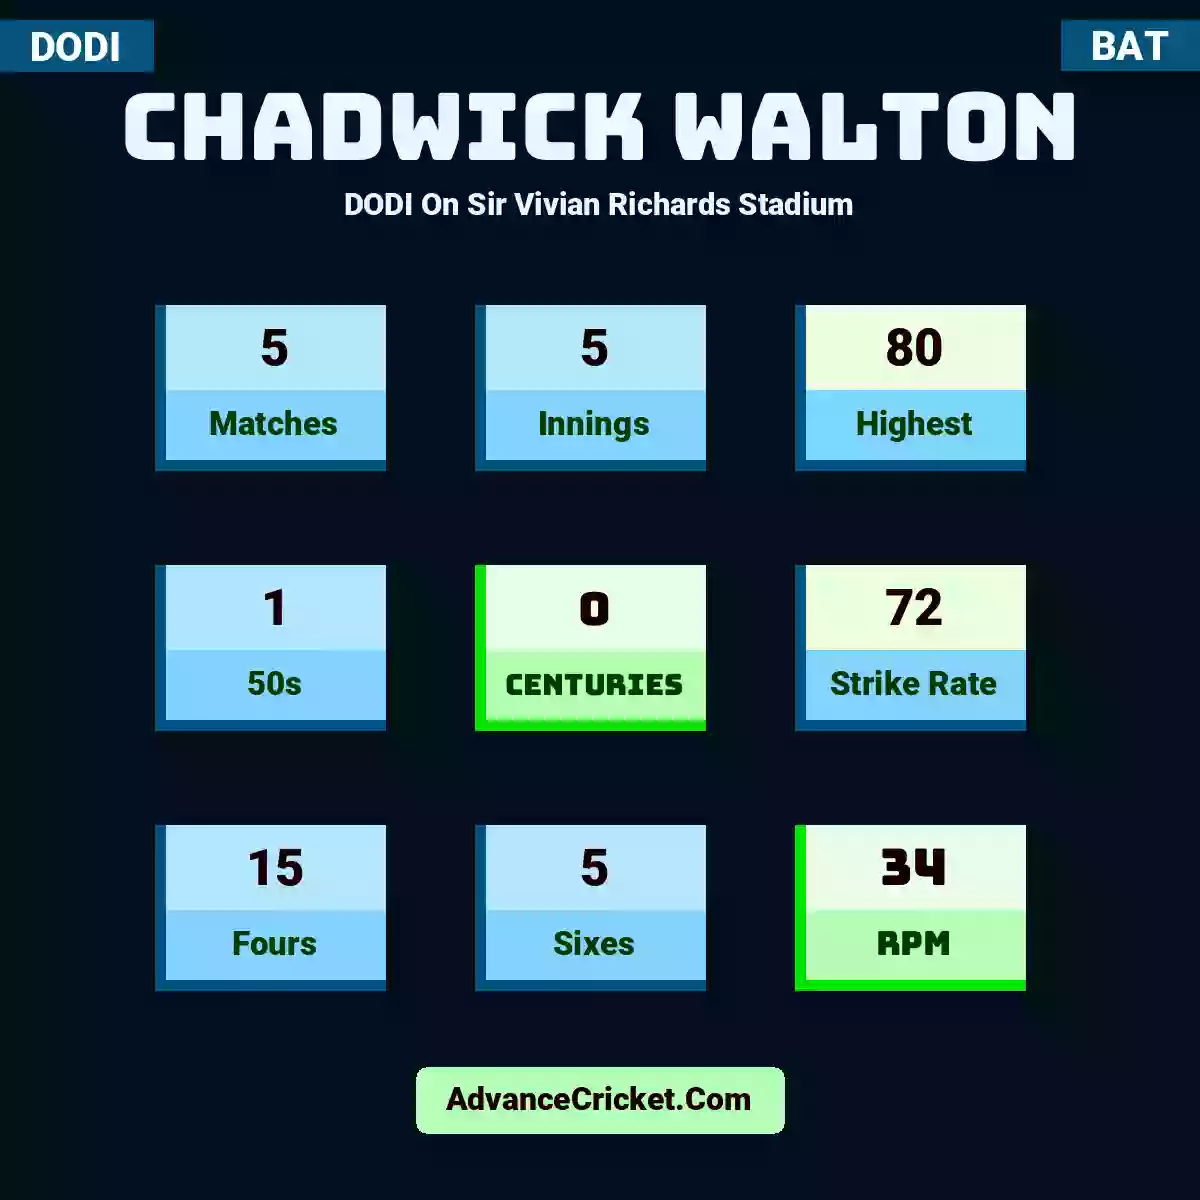 Chadwick Walton DODI  On Sir Vivian Richards Stadium, Chadwick Walton played 5 matches, scored 80 runs as highest, 1 half-centuries, and 0 centuries, with a strike rate of 72. C.Walton hit 15 fours and 5 sixes, with an RPM of 34.